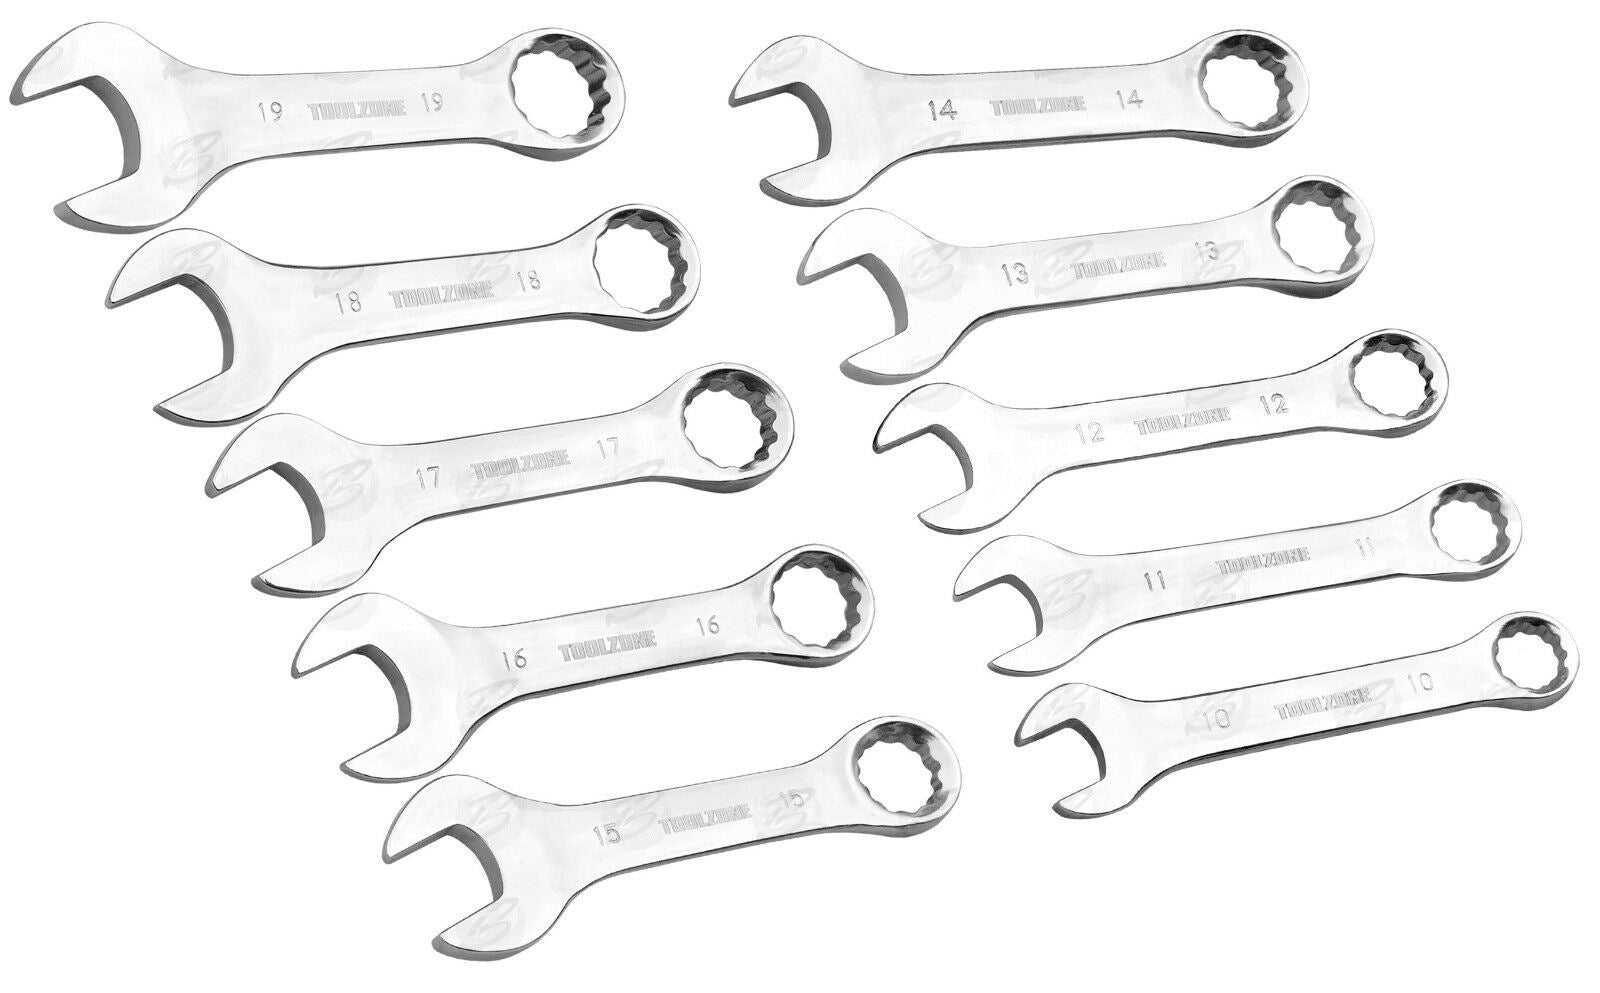 TOOLZONE 50 Piece Combination Spanner Set 6mm - 32mm